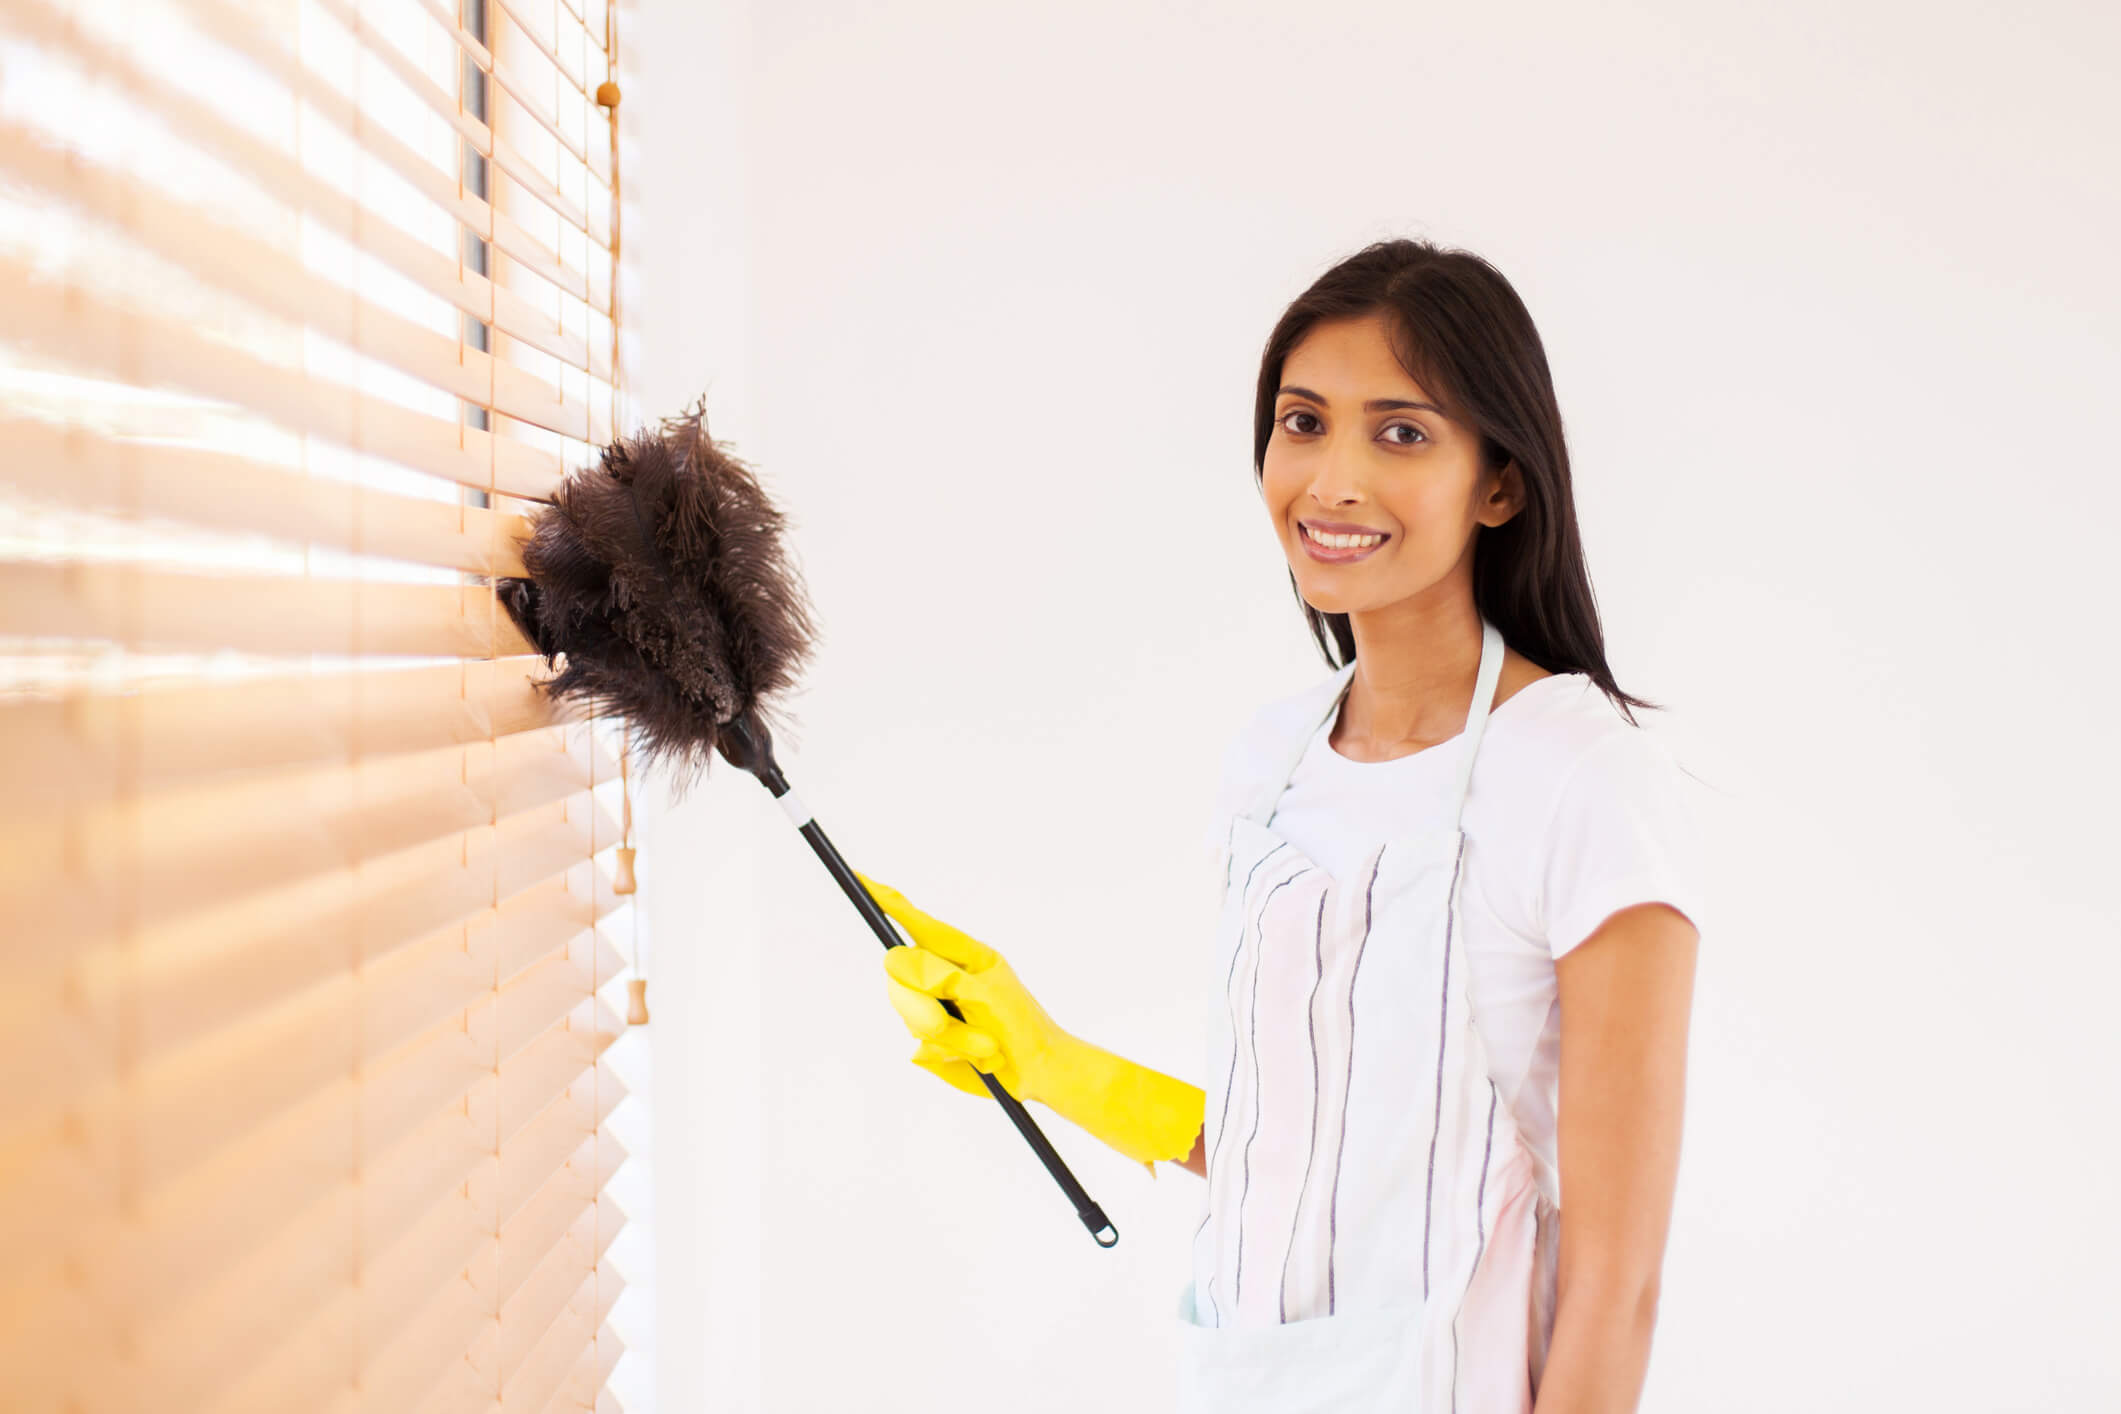 How To Clean Wooden Venetian Blinds, How Do You Clean Wooden Venetian Blinds